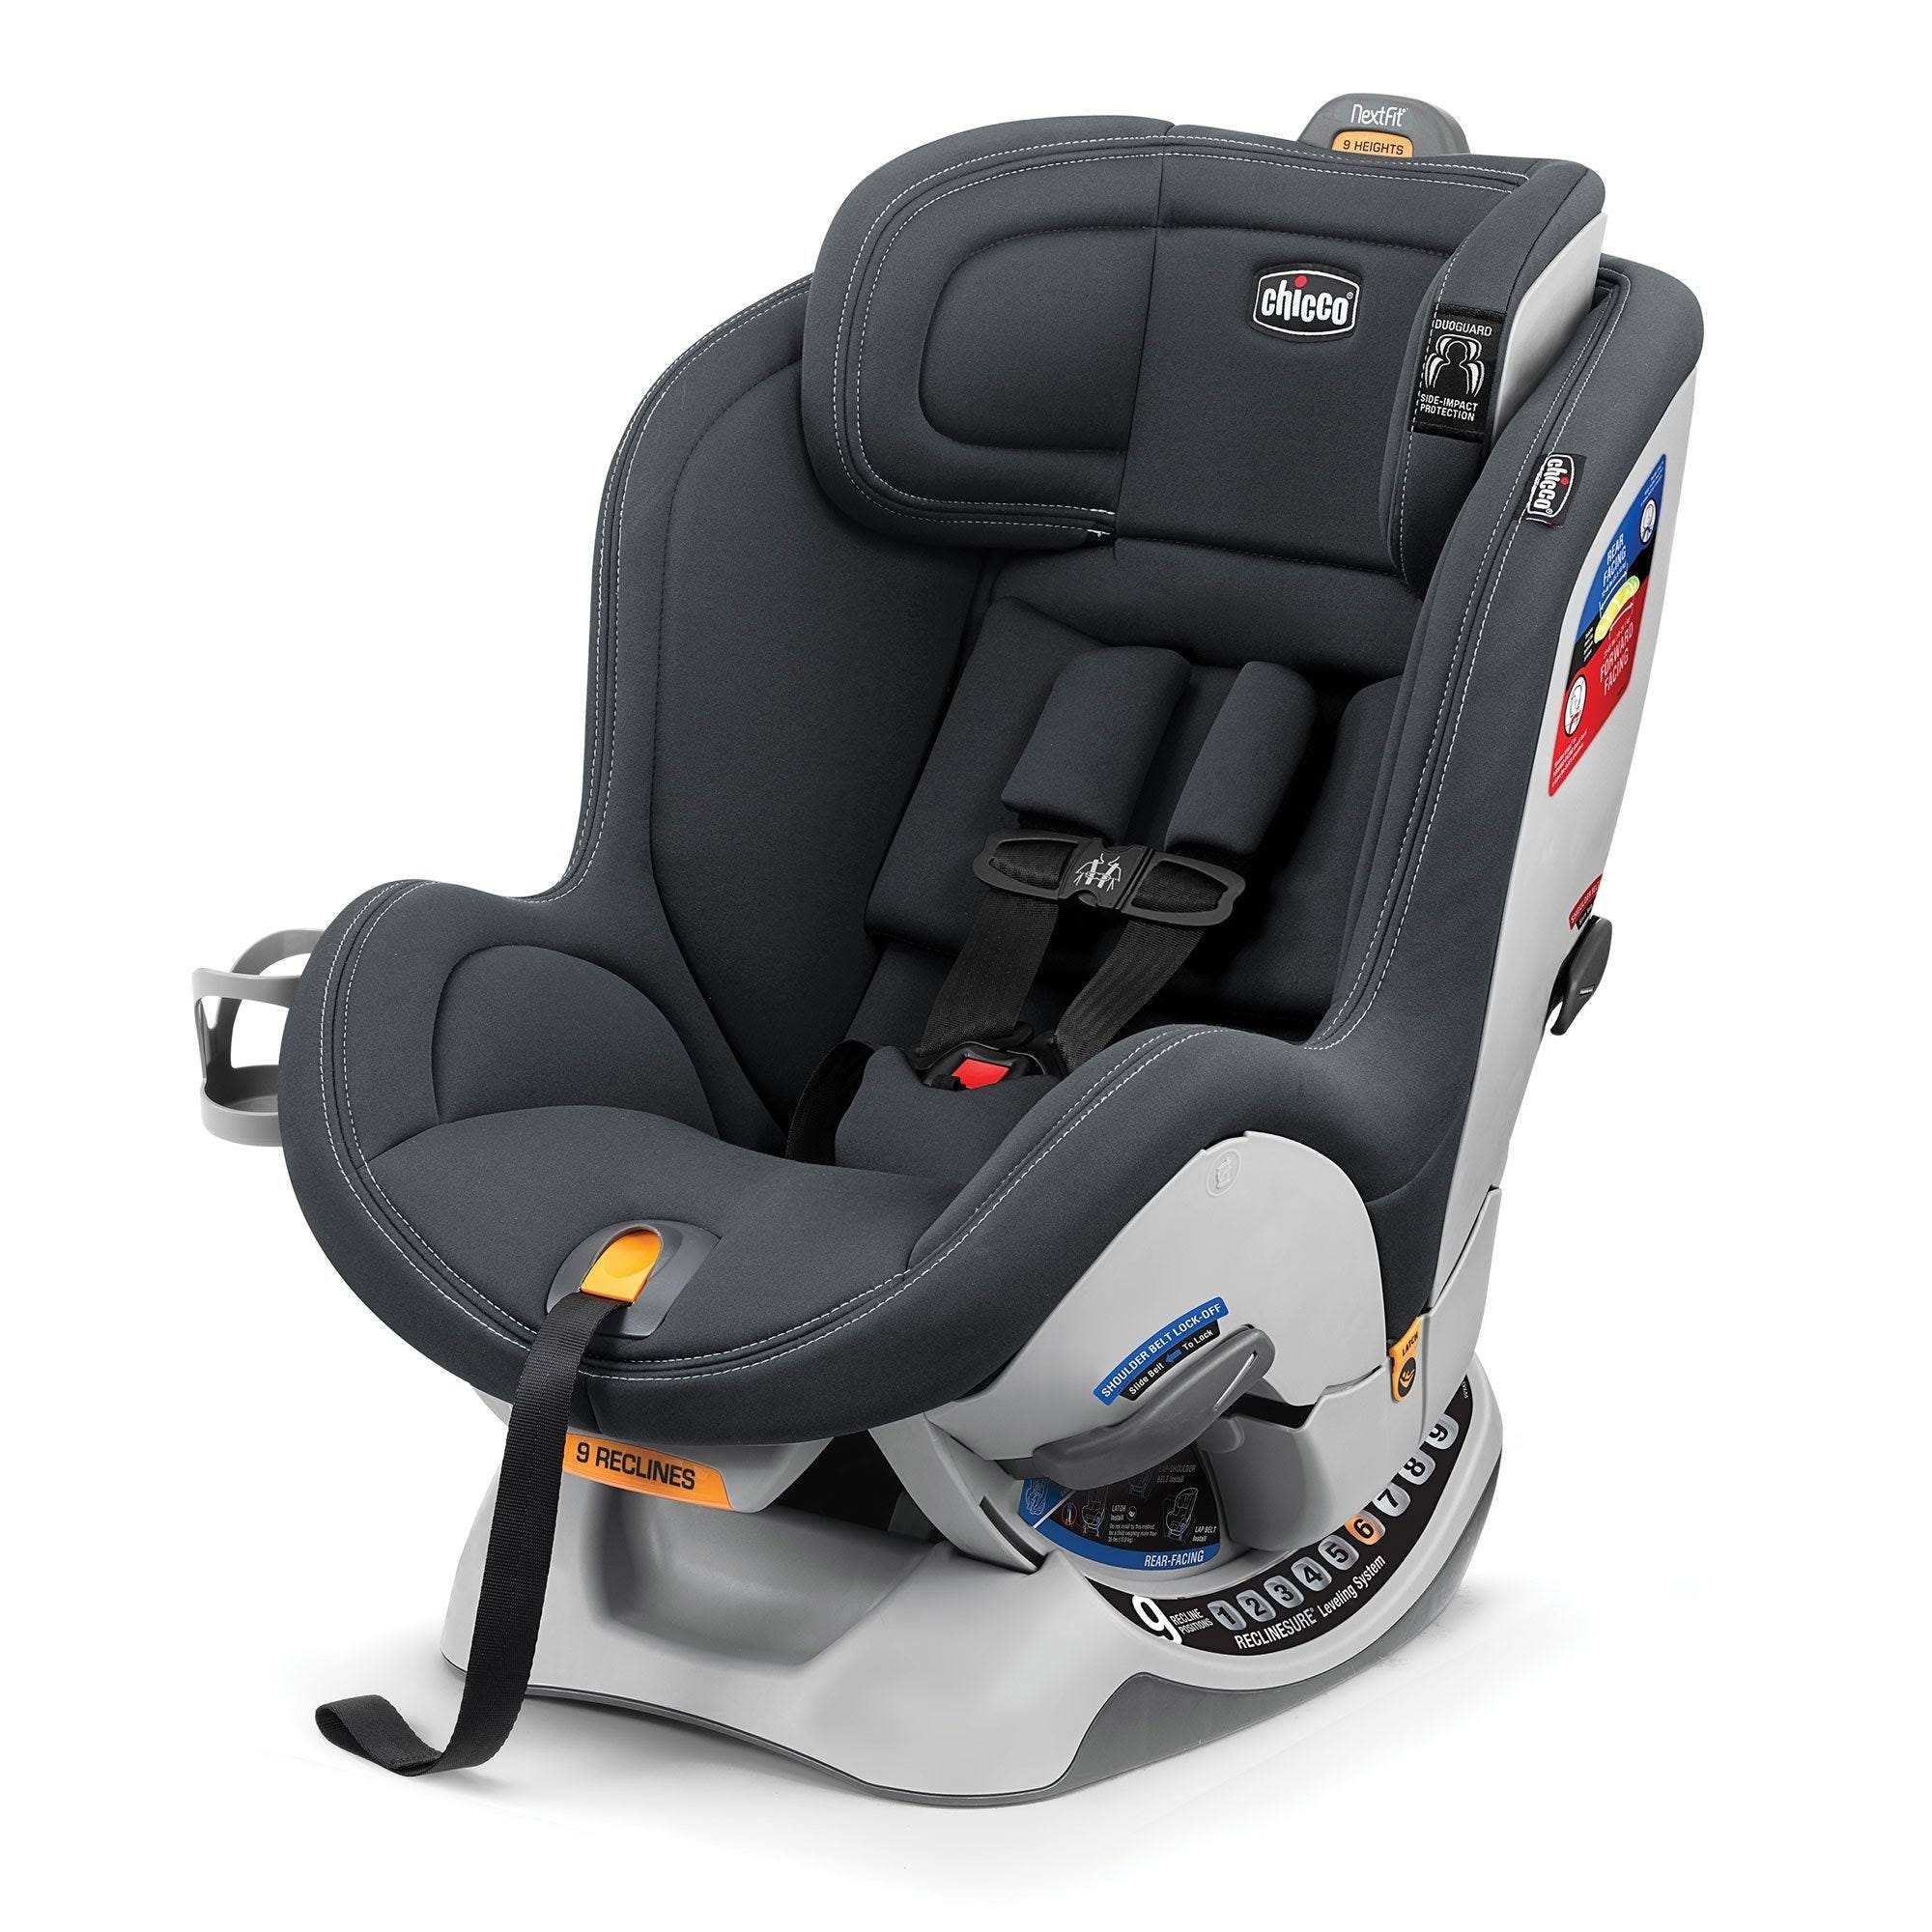 Pre-Owned Chicco NextFit Sport Convertible Car Seat - Graphite | Image